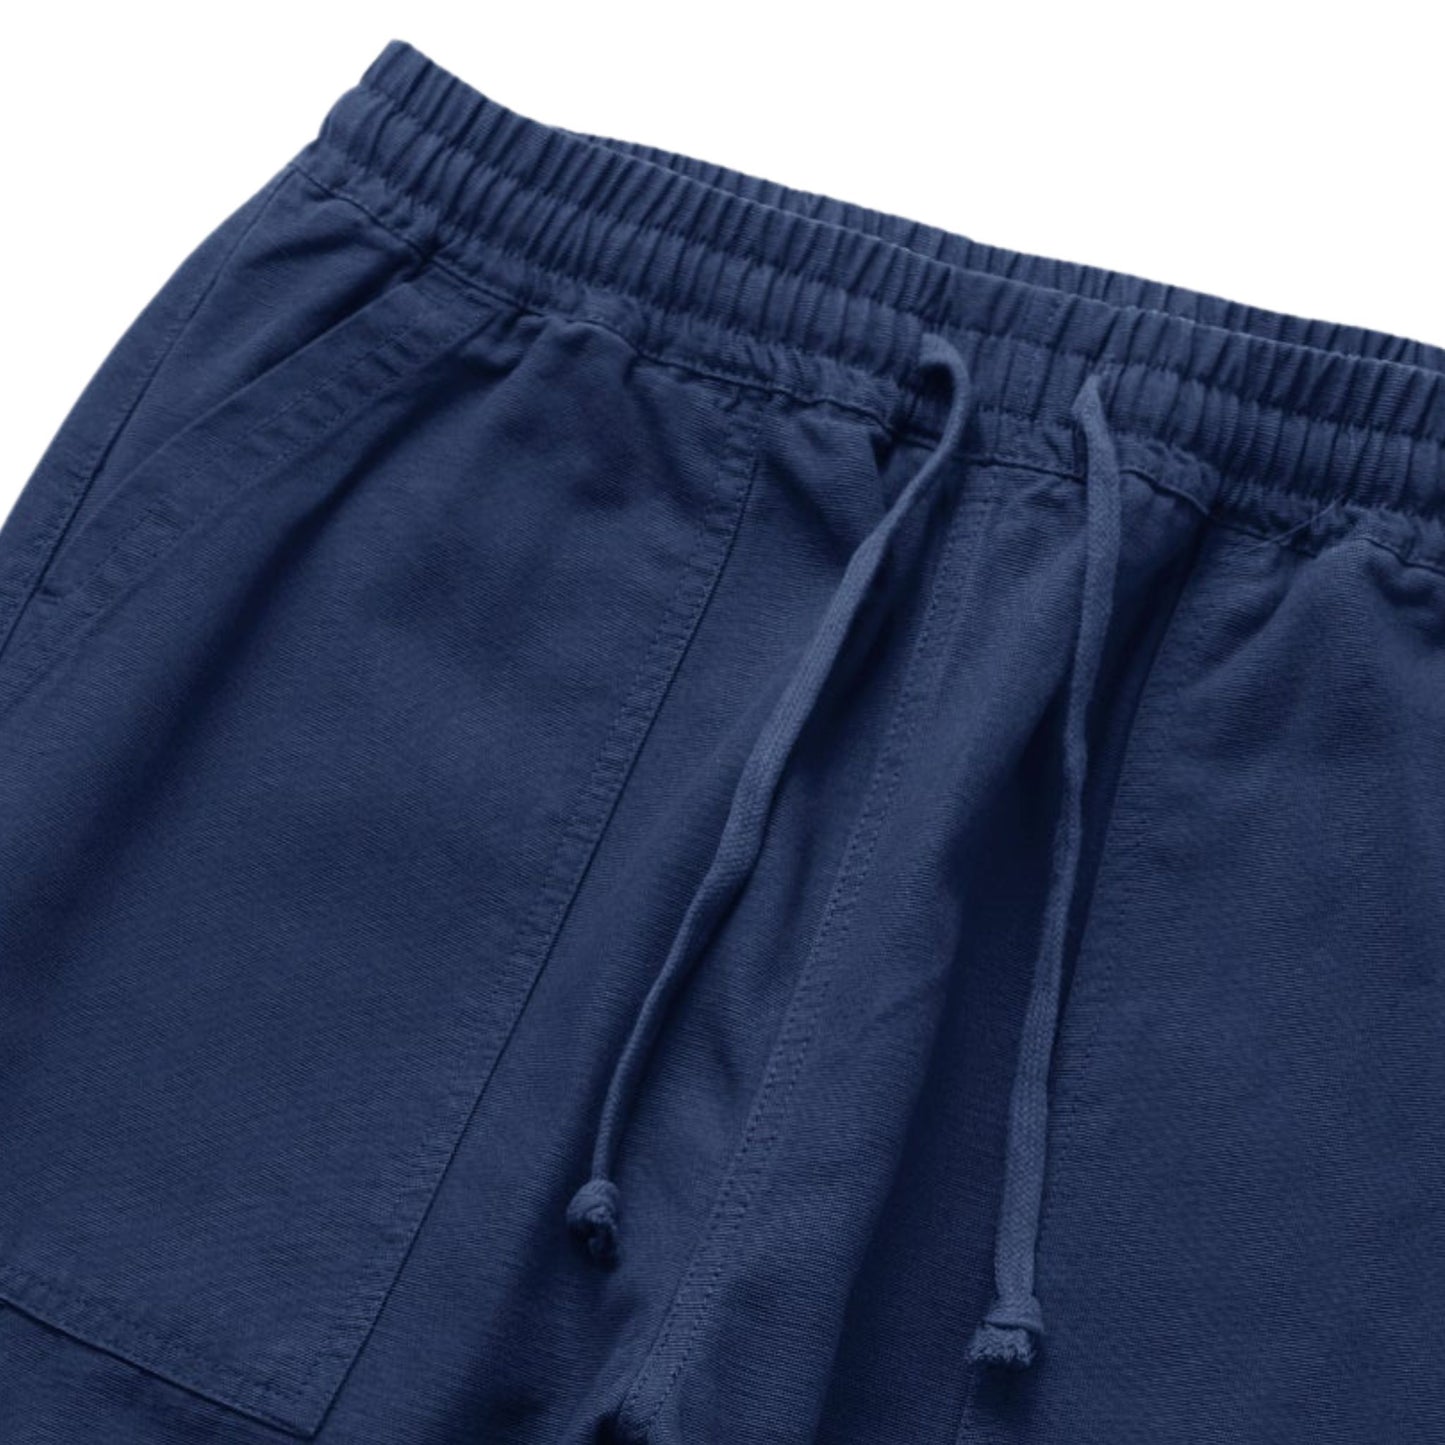 SERVICE WORKS - Canvas Chef Pants